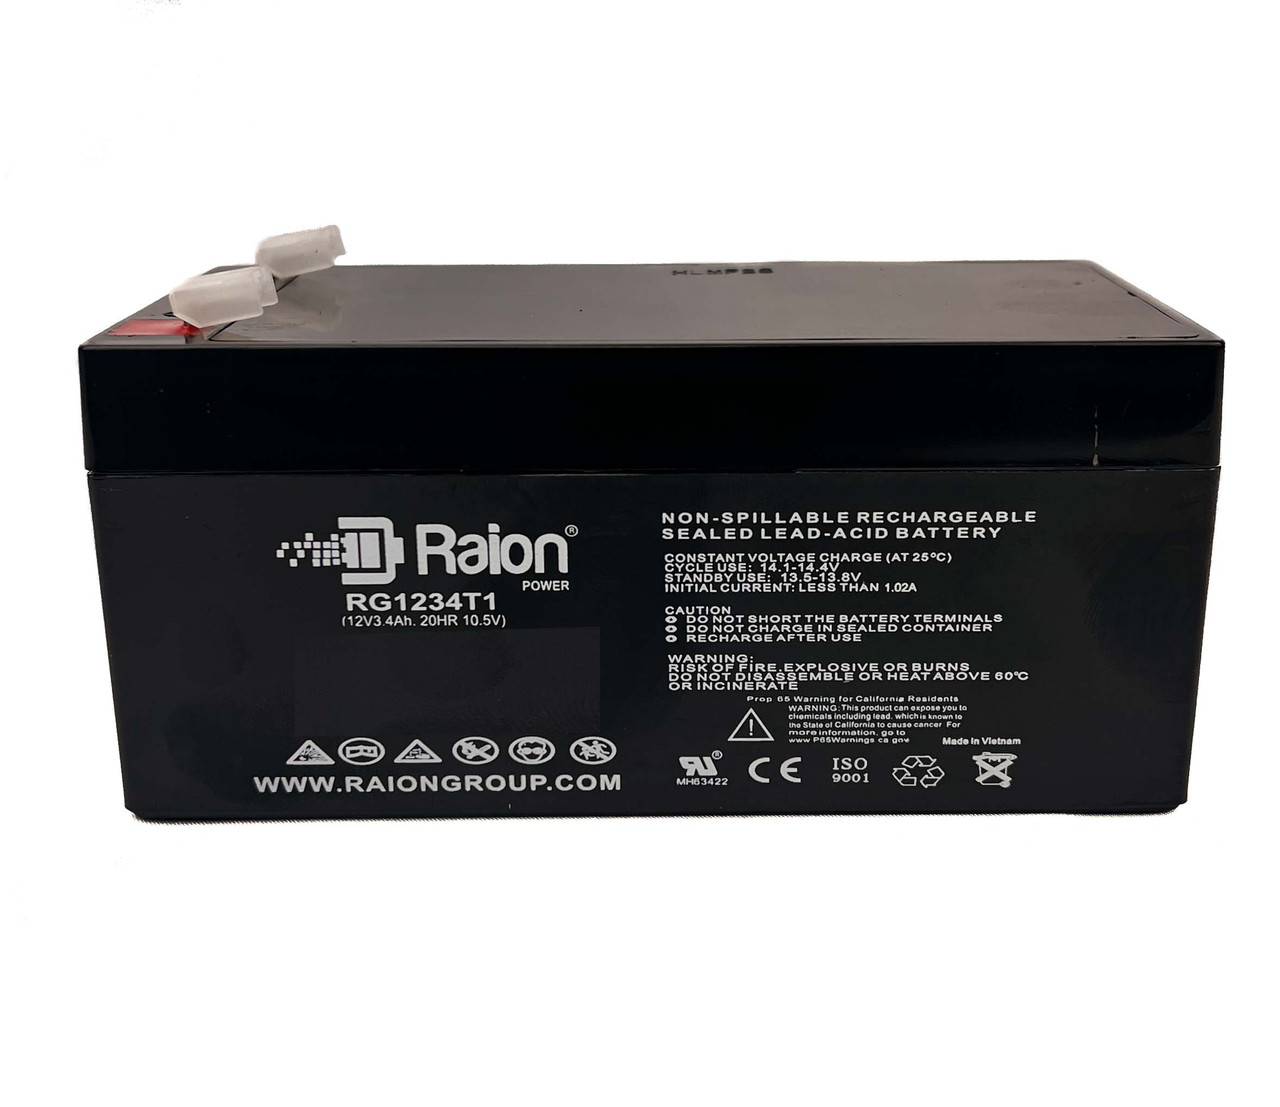 Raion Power RG1234T1 Rechargeable Compatible Replacement Battery for Park Medical Electronics Lab 1050 Mini Lab